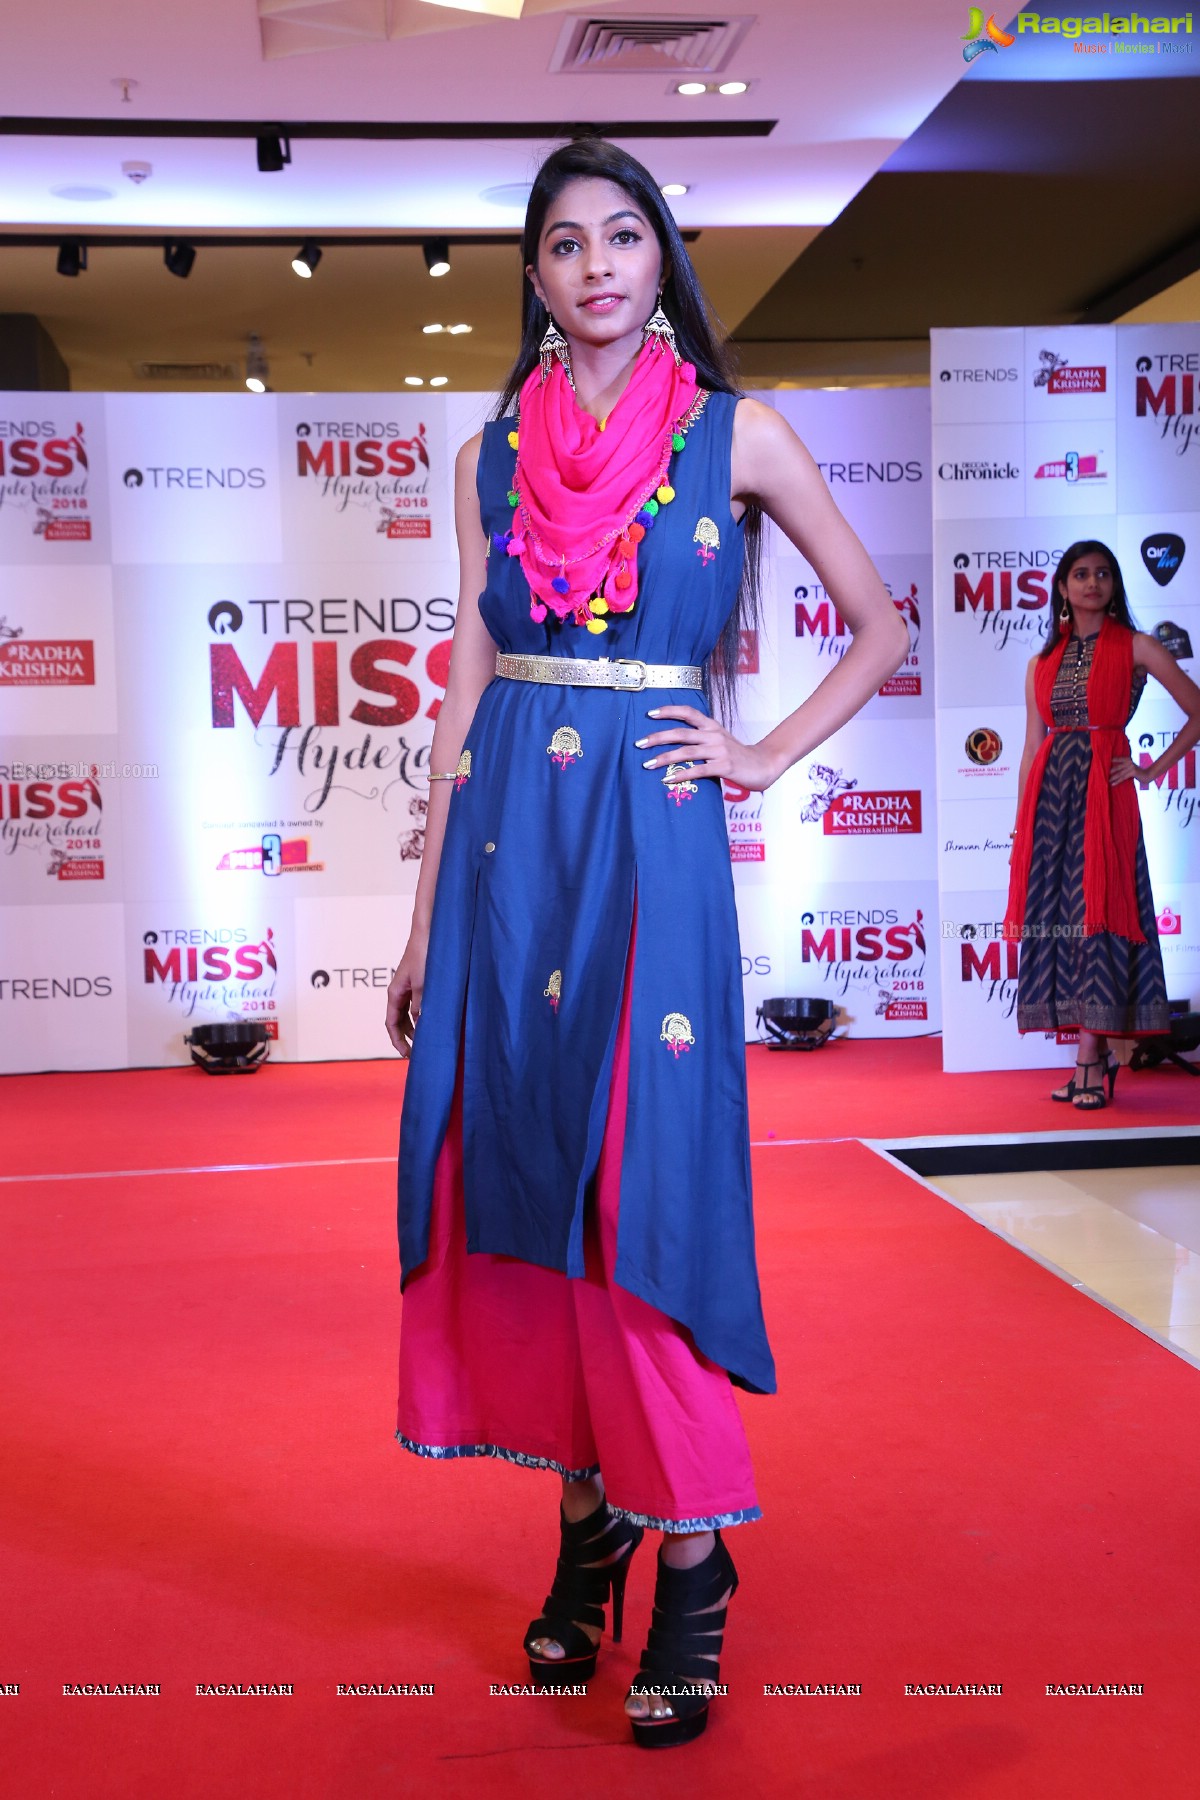 Trends Miss Hyderabad 2018 Top 25 Finalists Intro and Fashion Show at Reliance Trends, Hyderabad